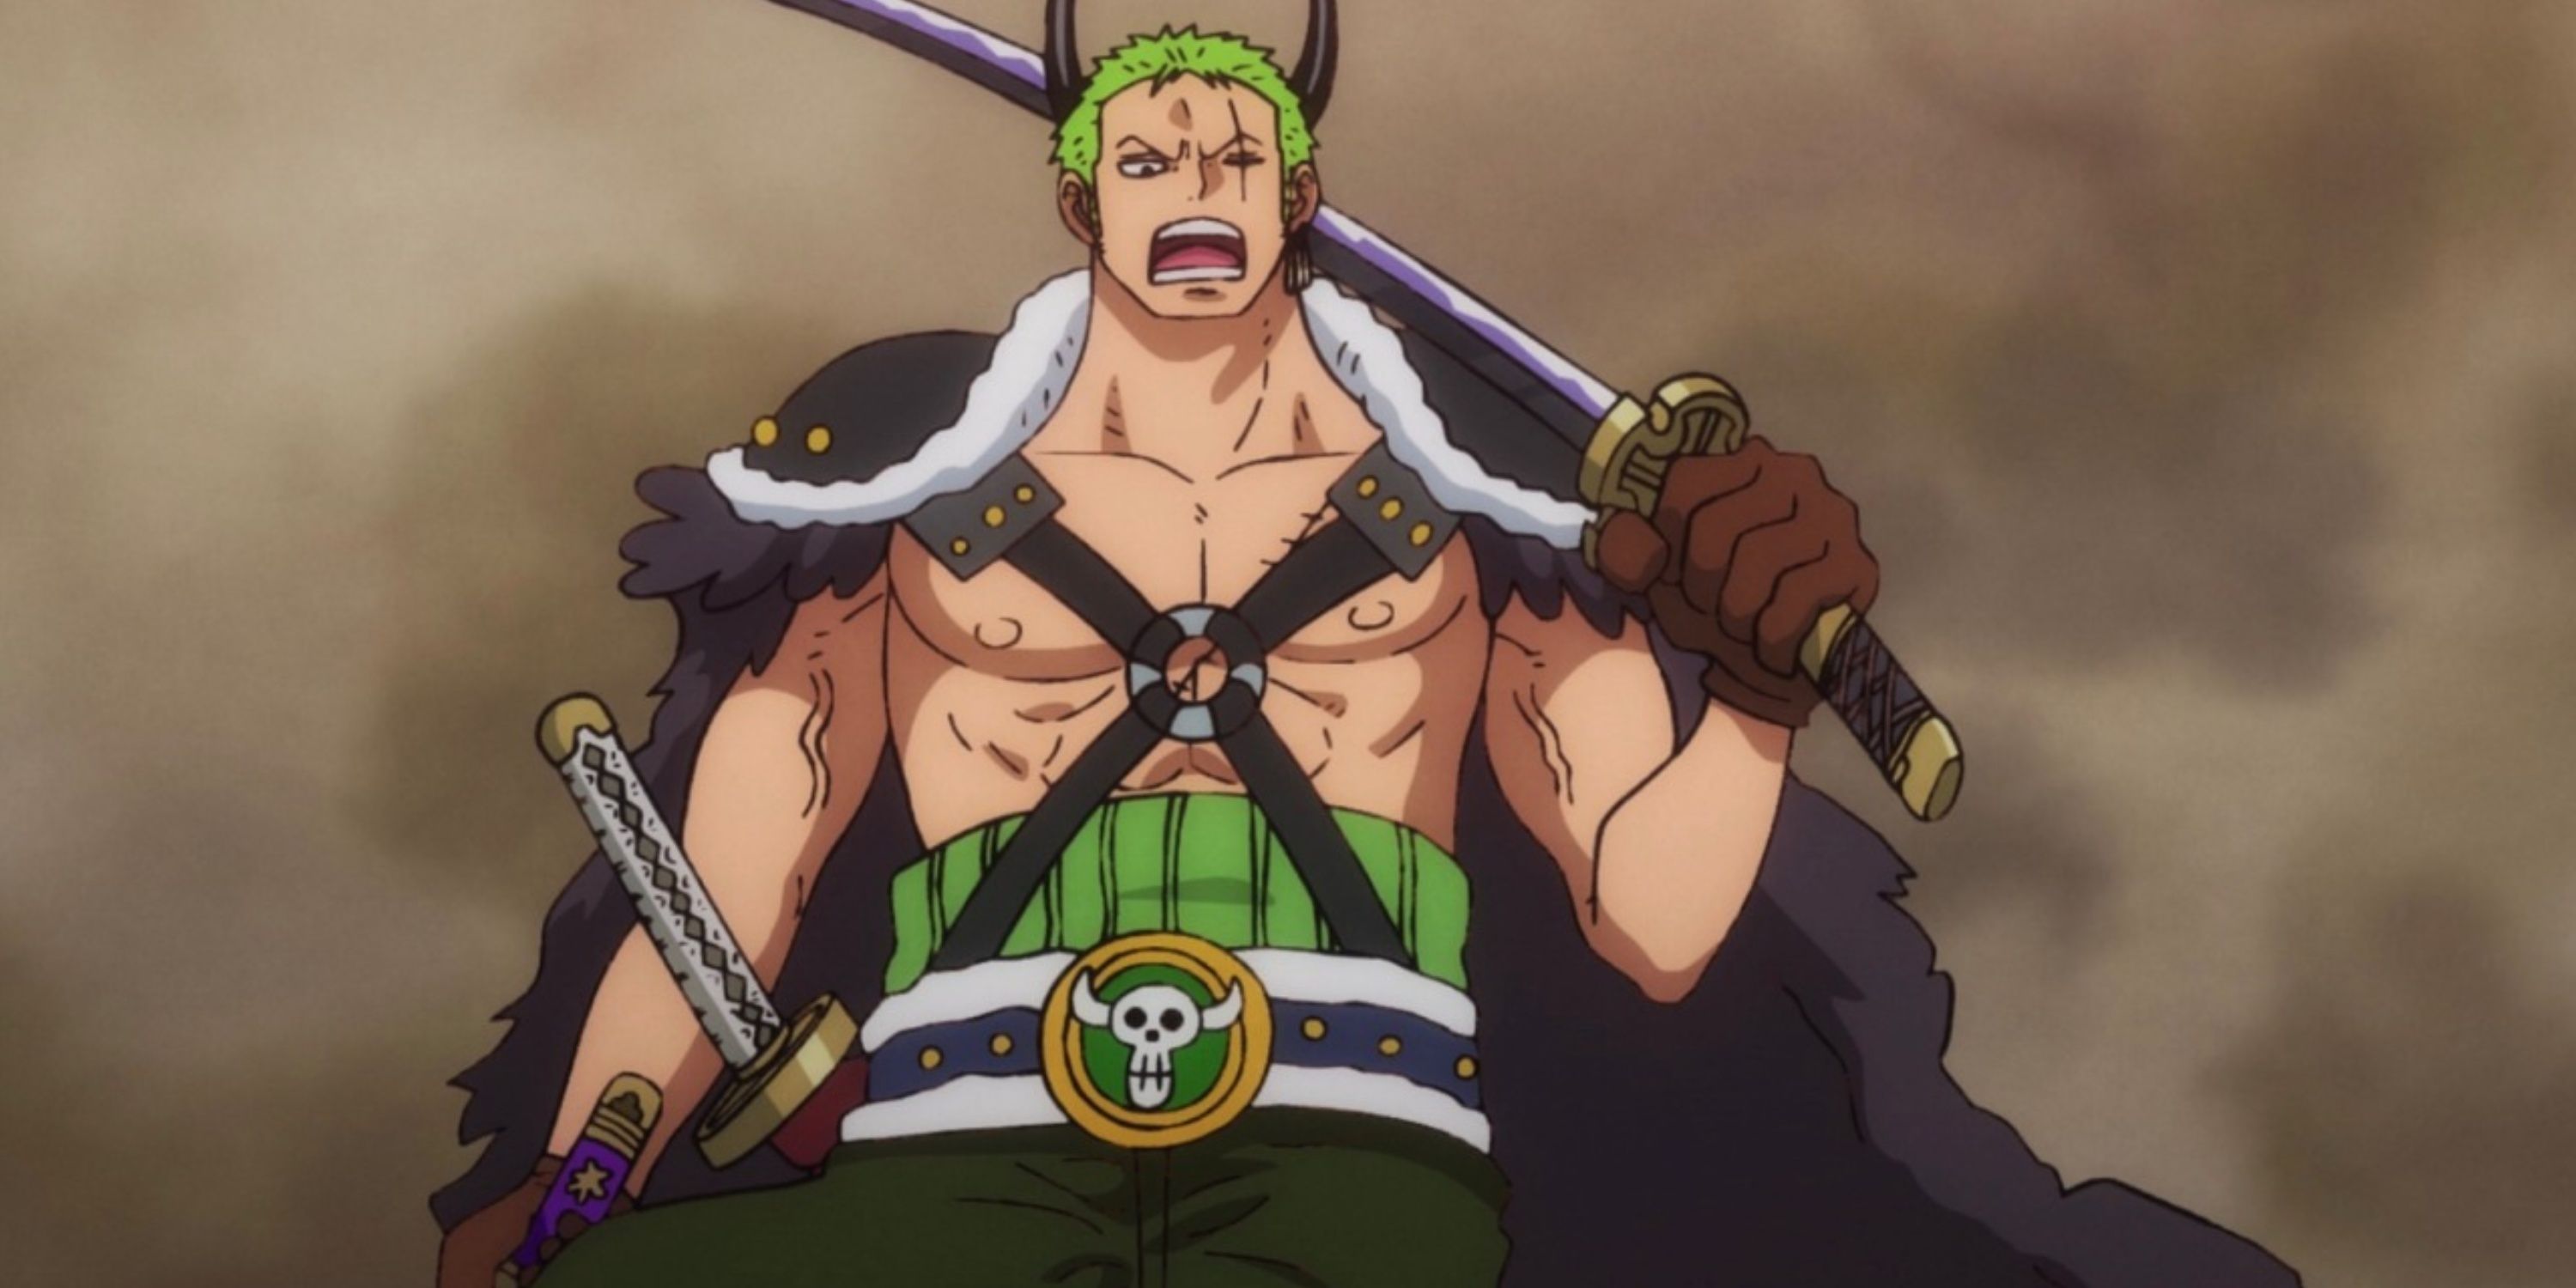 Roronoa Zoro wearing a Beast Pirates disguise during One Piece's Wano Country Arc